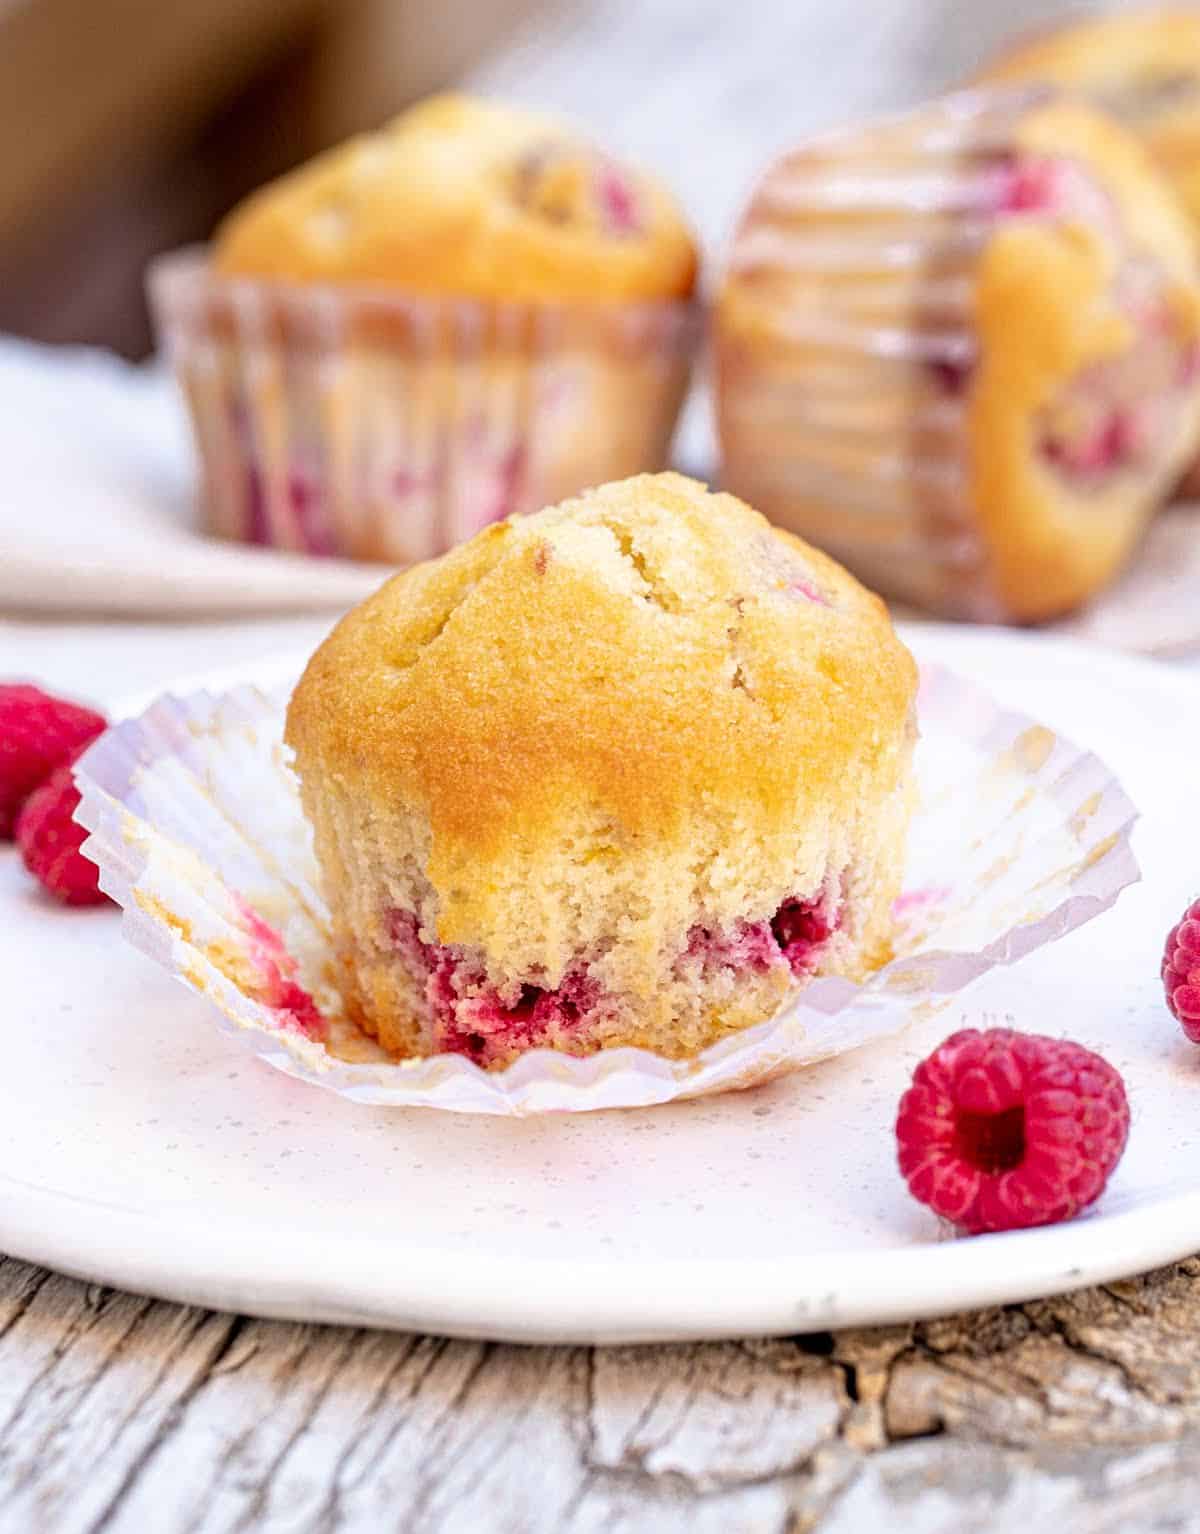 Whole raspberry muffin on opened paper liner on white plate, more muffins in background.